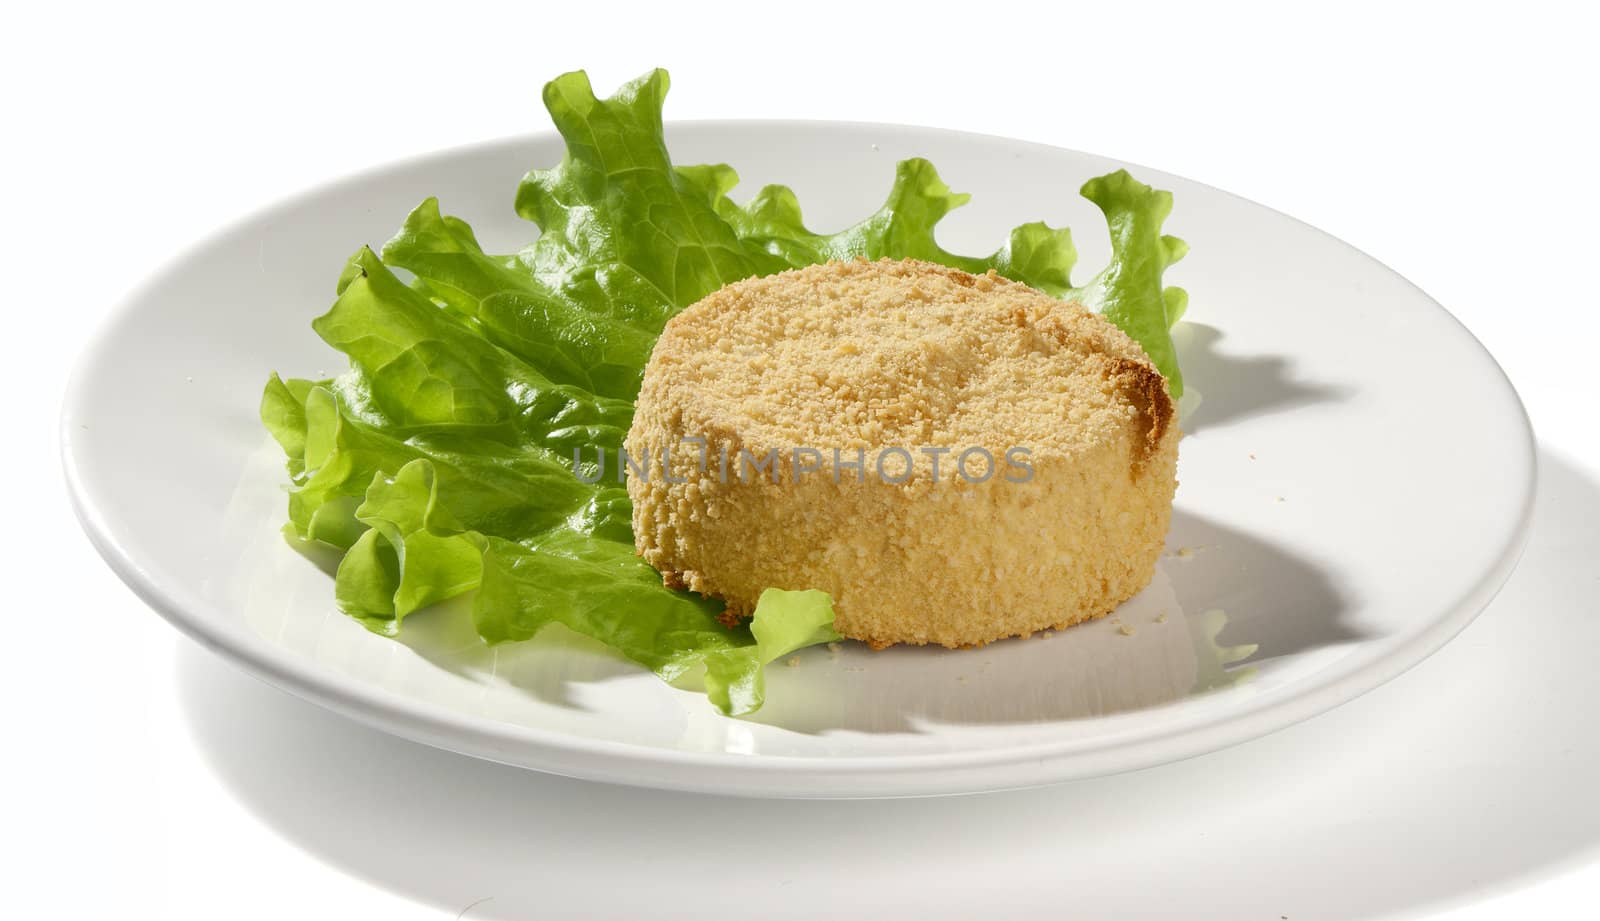 Baked camambert coated with breadcrumbs with lettuce on the plate